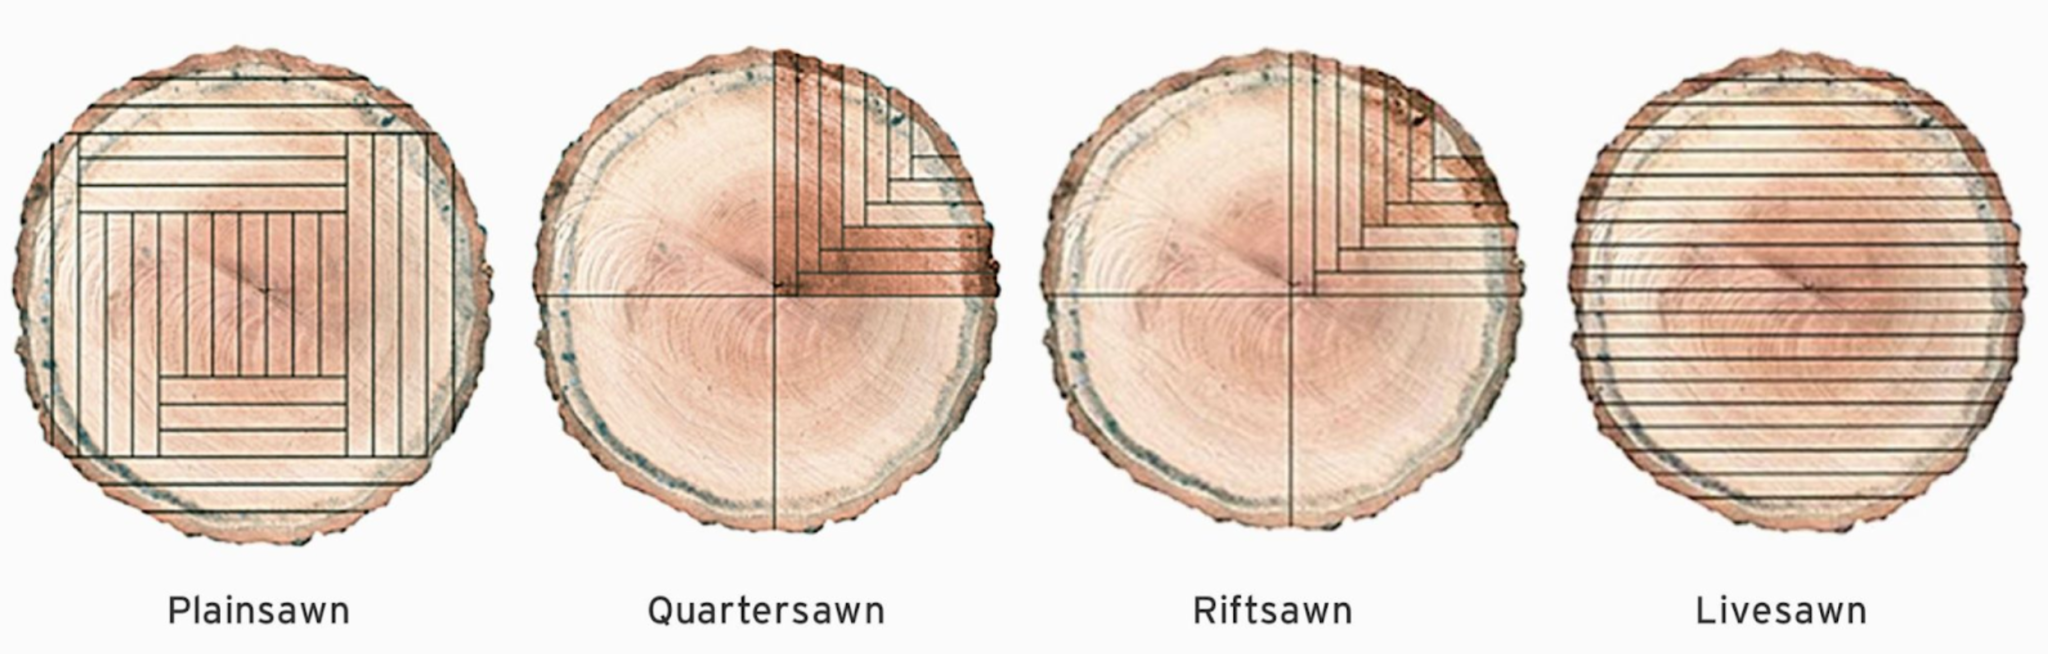 Diagram representing the types of solid wood flooring cuts